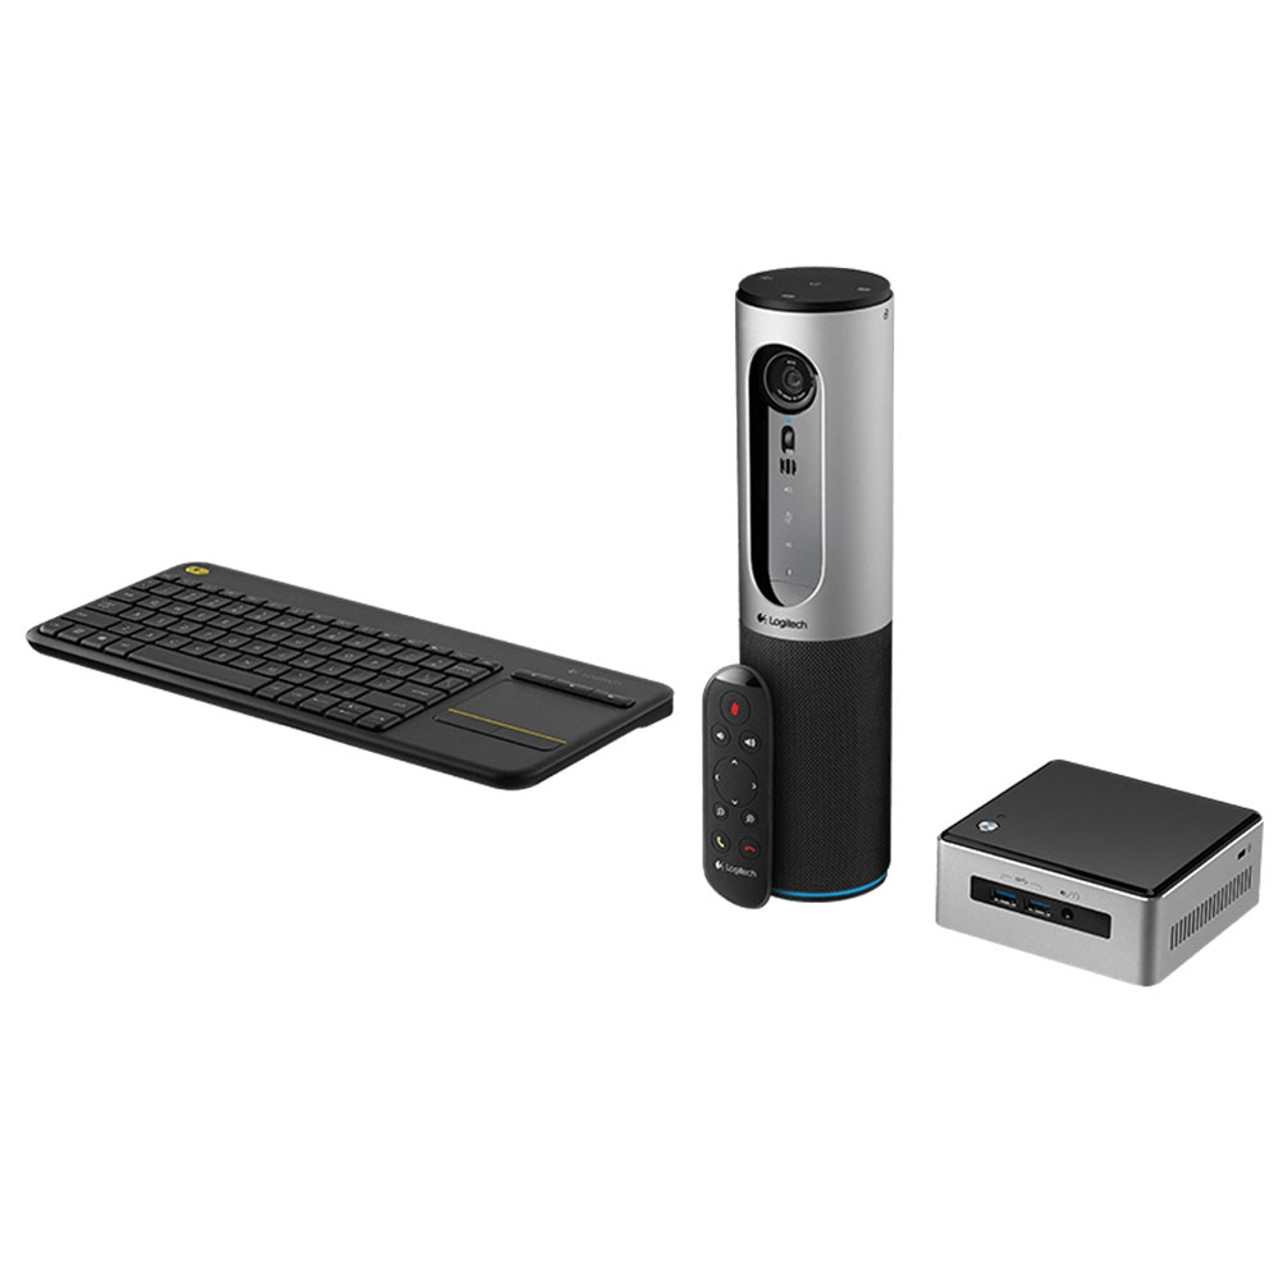 Logitech BCC950 All-In-One Webcam and Speakerphone